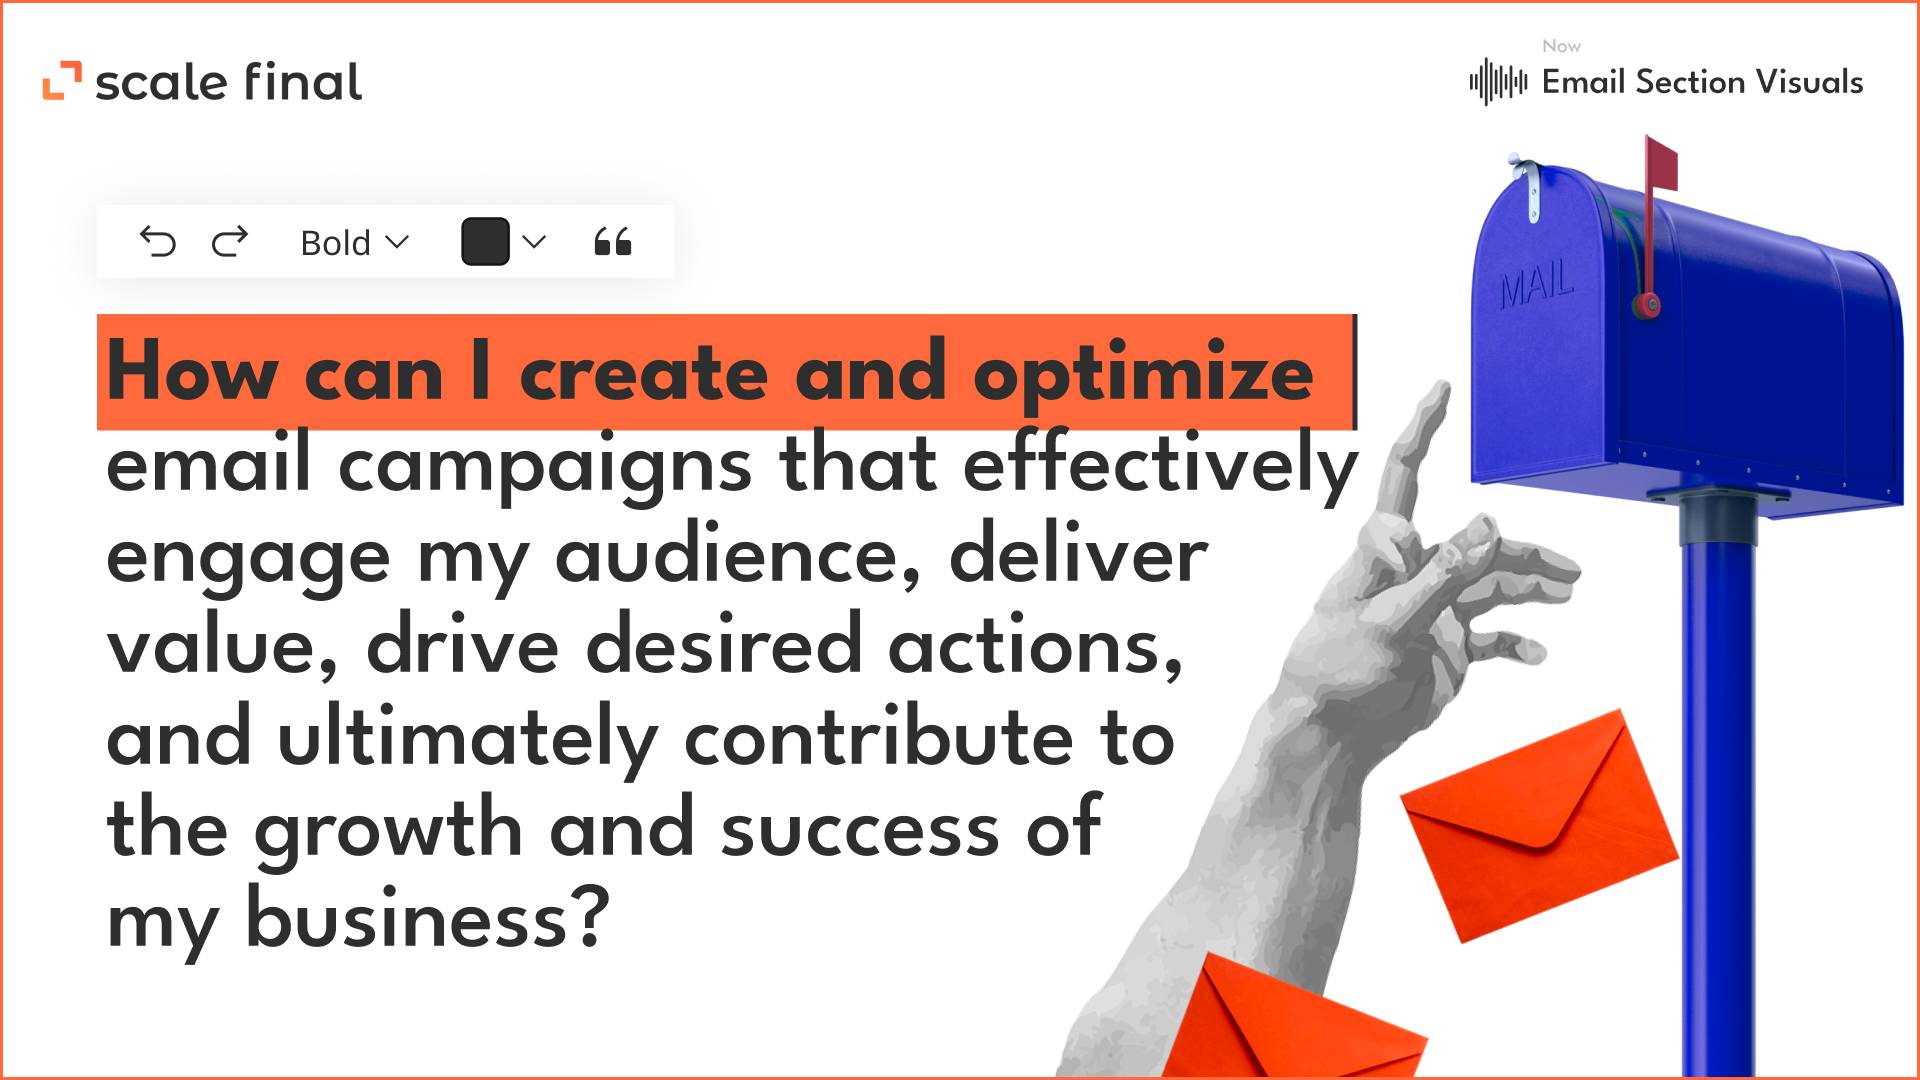 Email: How can I create and optimize email campaigns that effectively engage my audience, deliver value, drive desired actions, and ultimately contribute to the growth and success of my business?